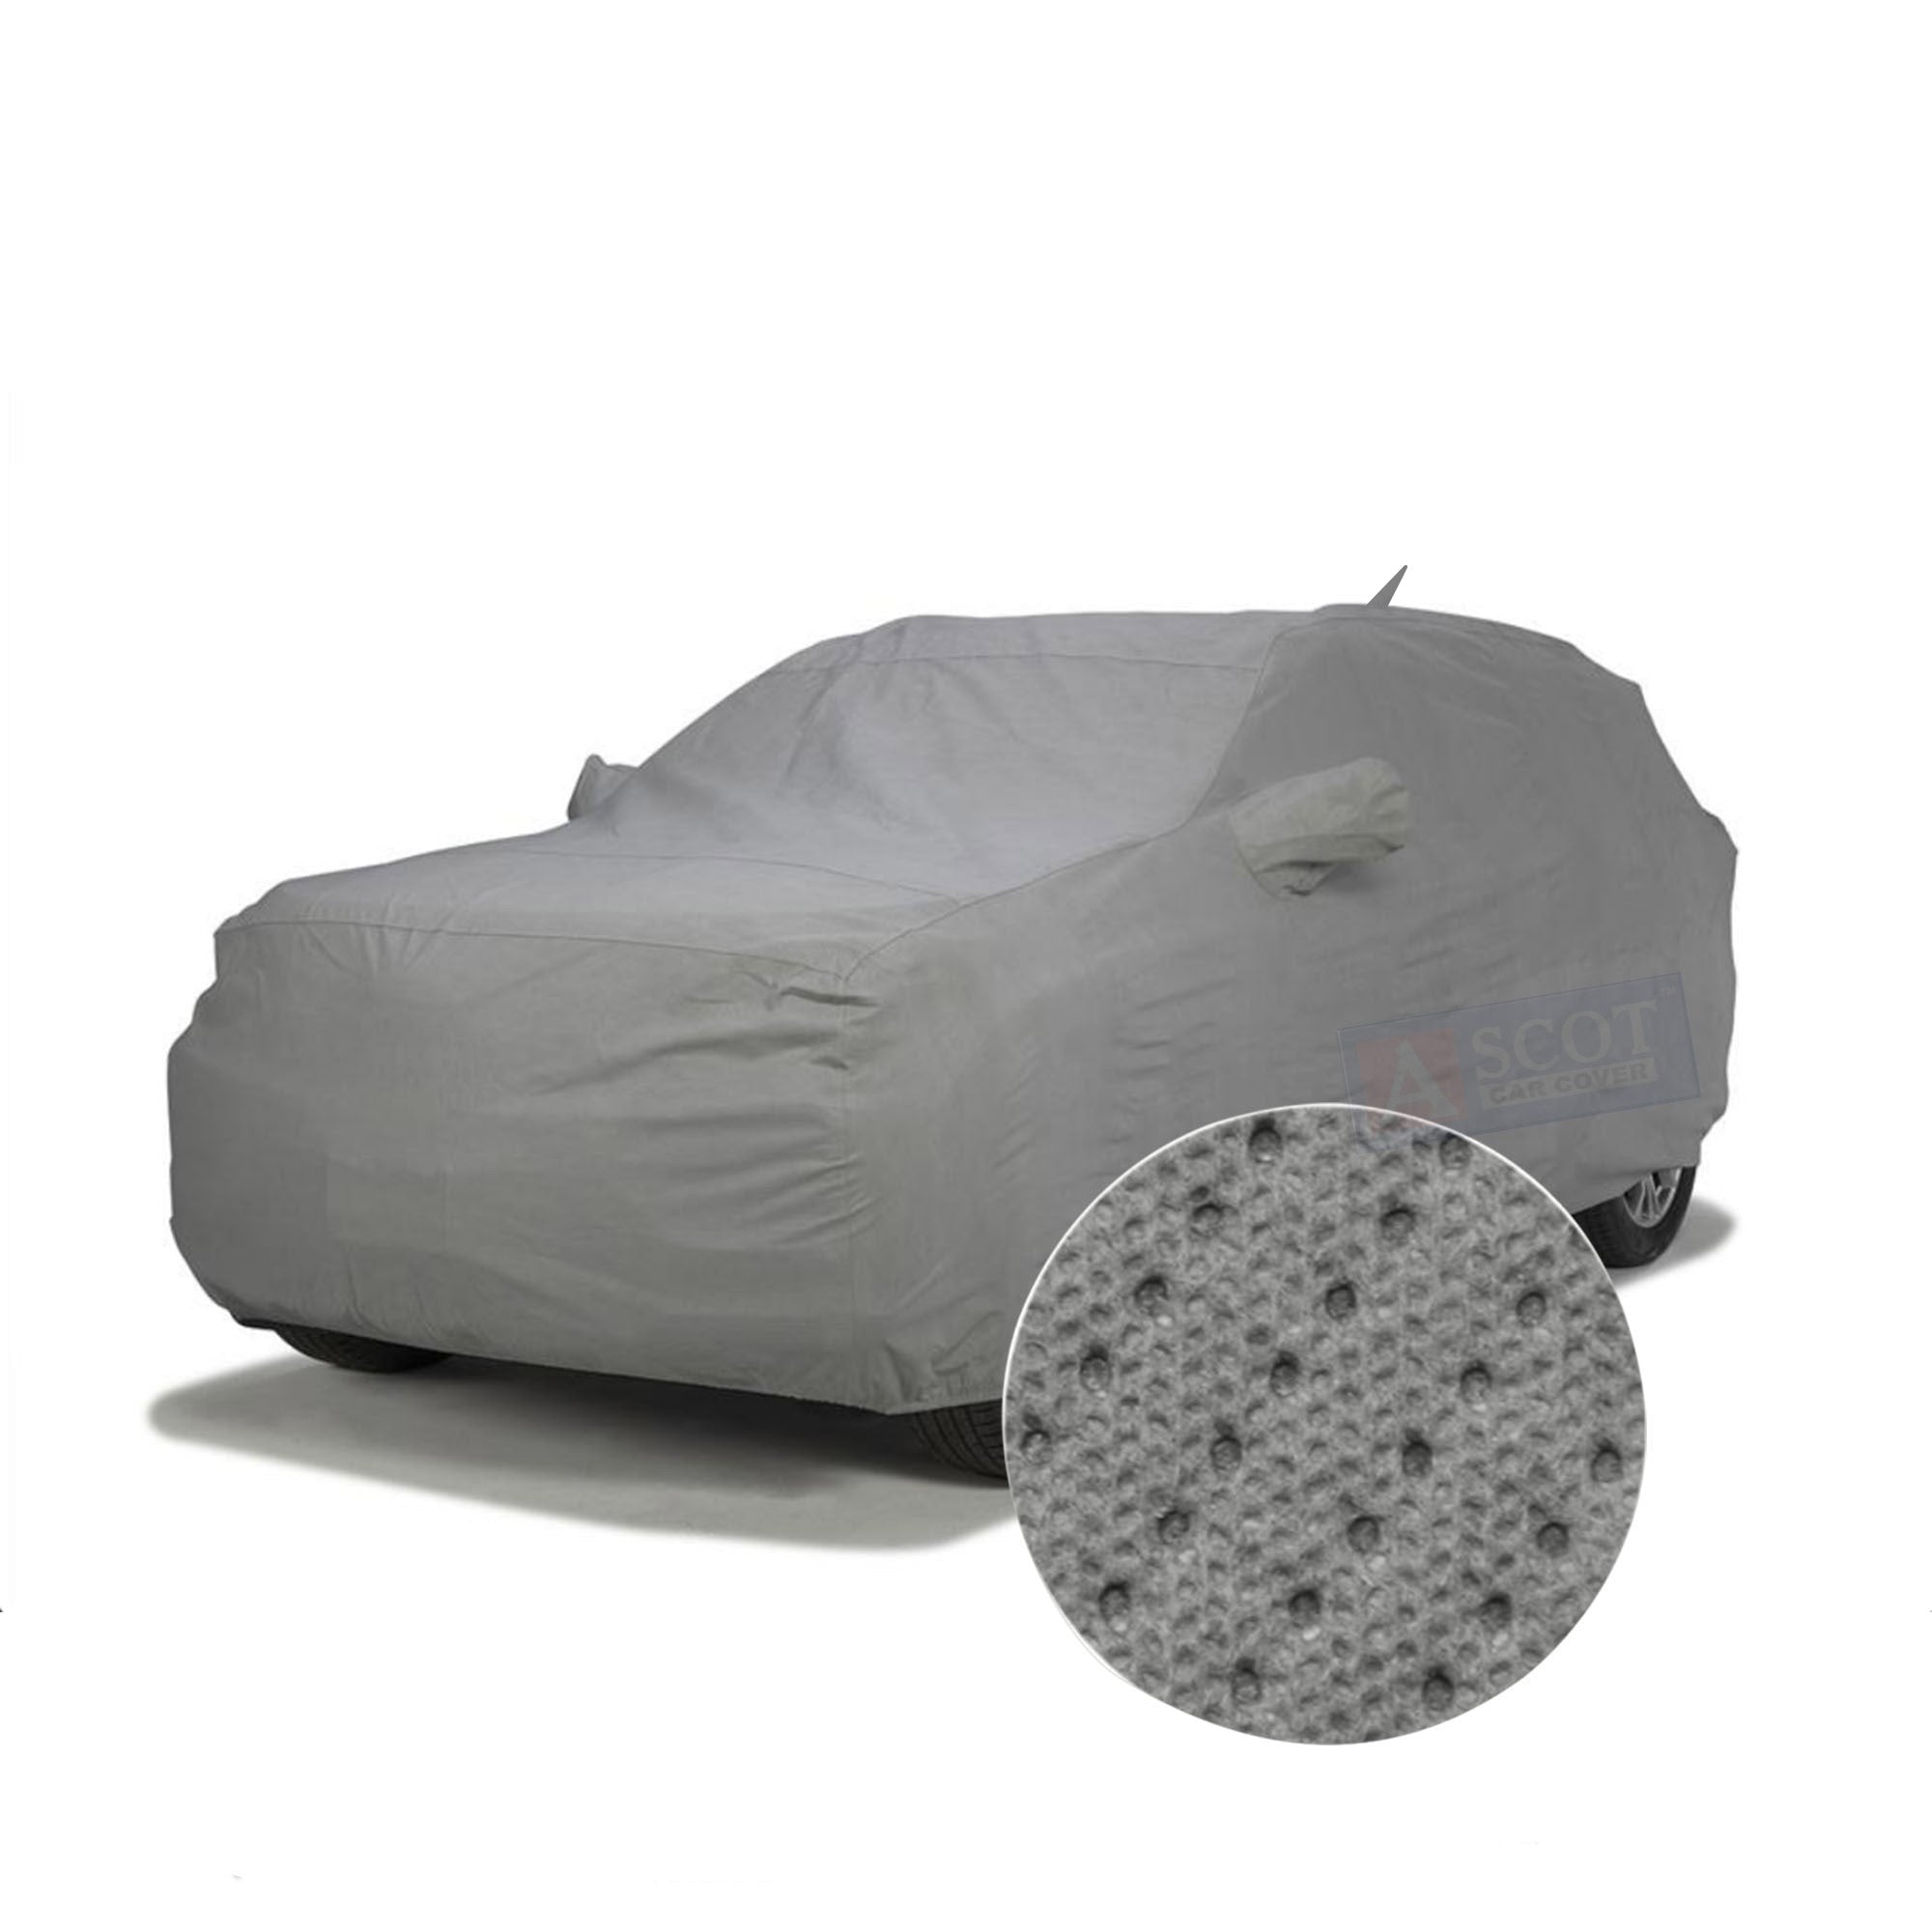 Volkswagen Polo Car Cover, Perfect Fit Guarantee